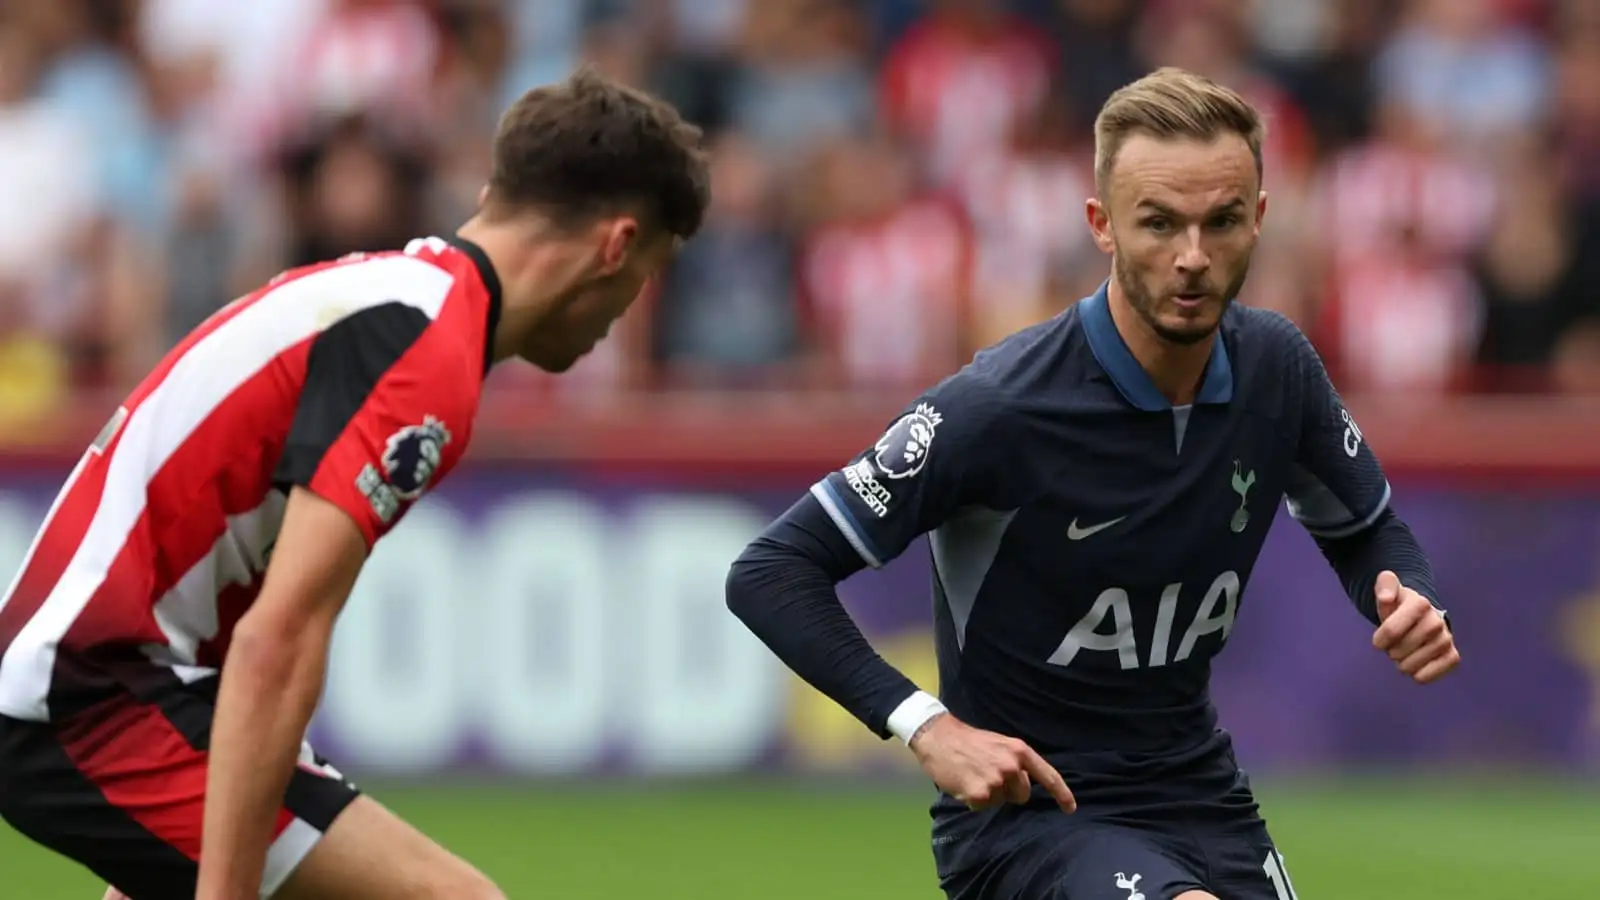 James Maddison replaces Harry Kane as Tottenham's No.10 as Spurs